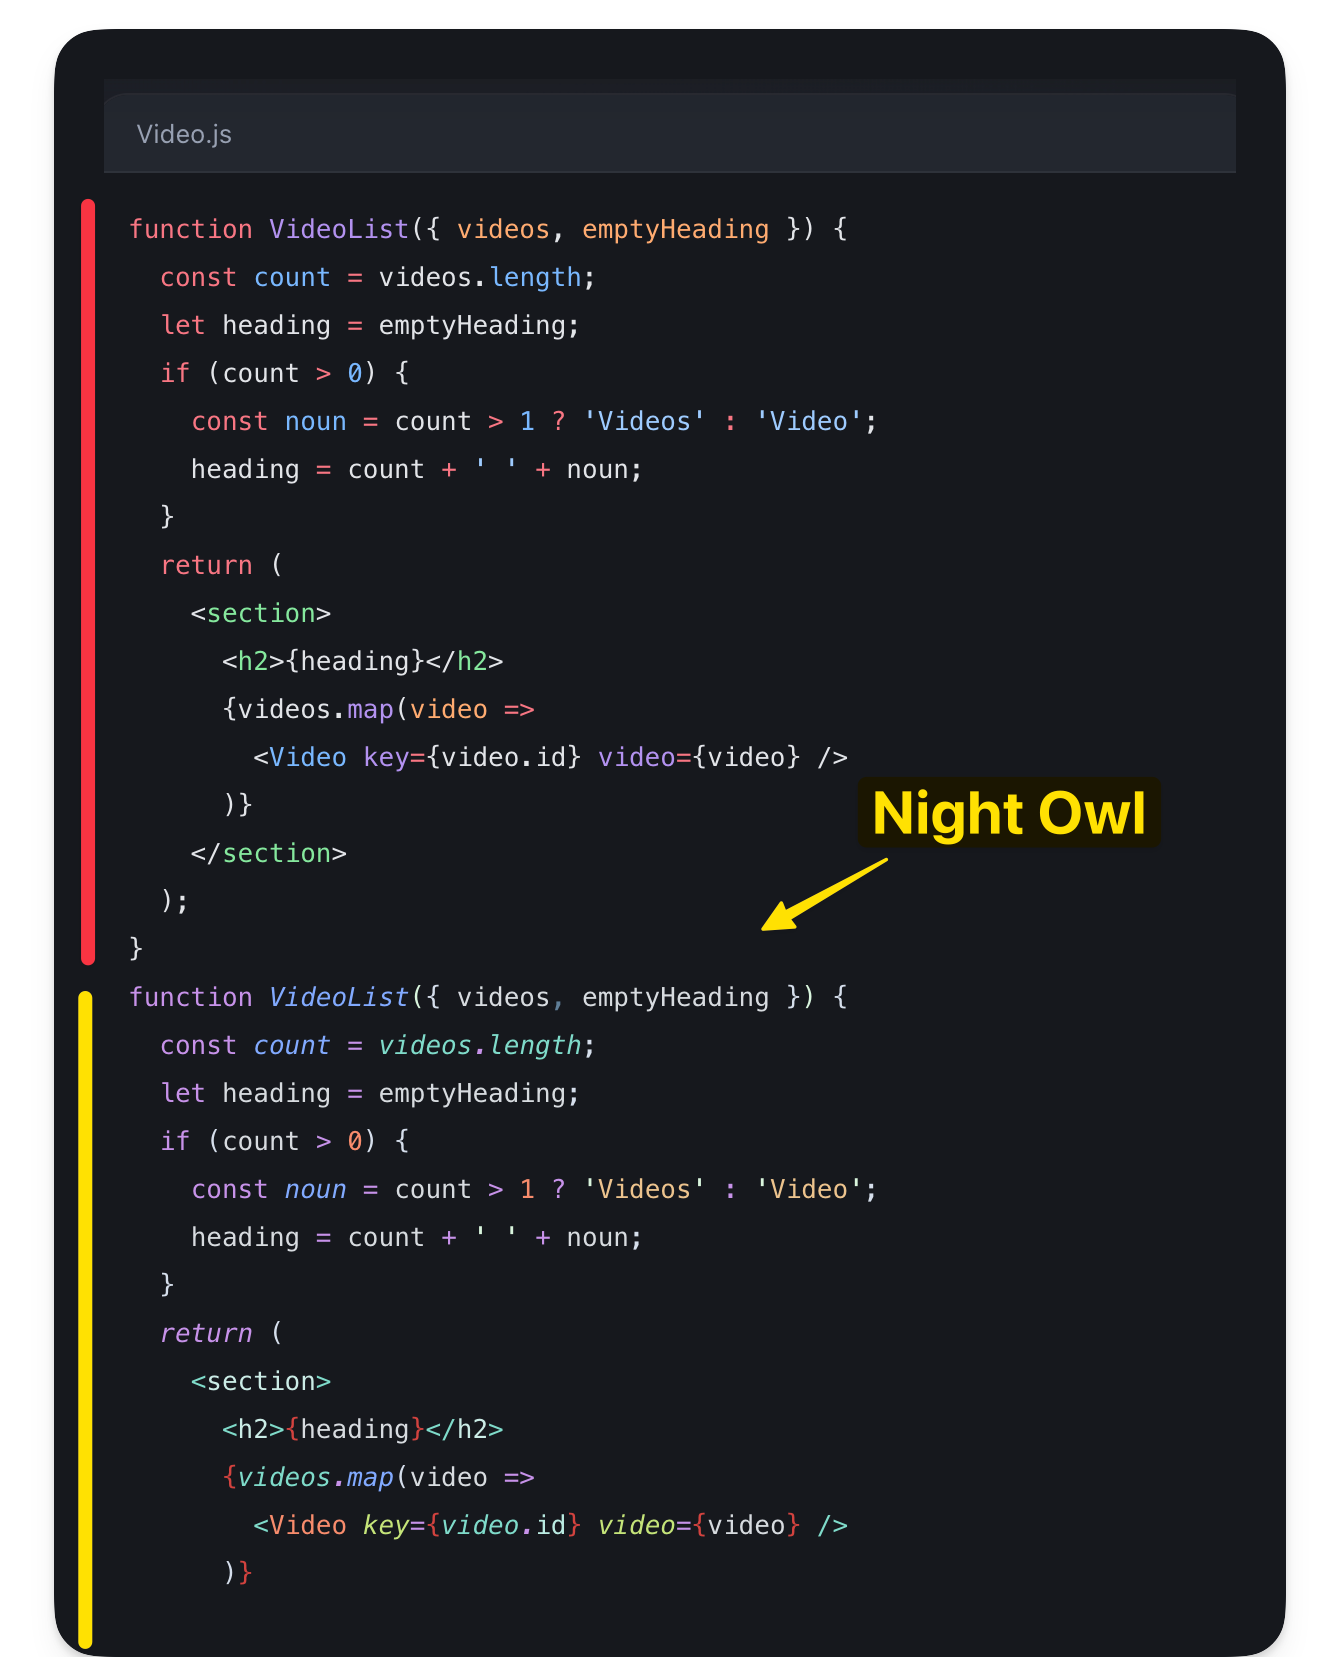 Comparing the previous highlighted code with the new Night Owl theme